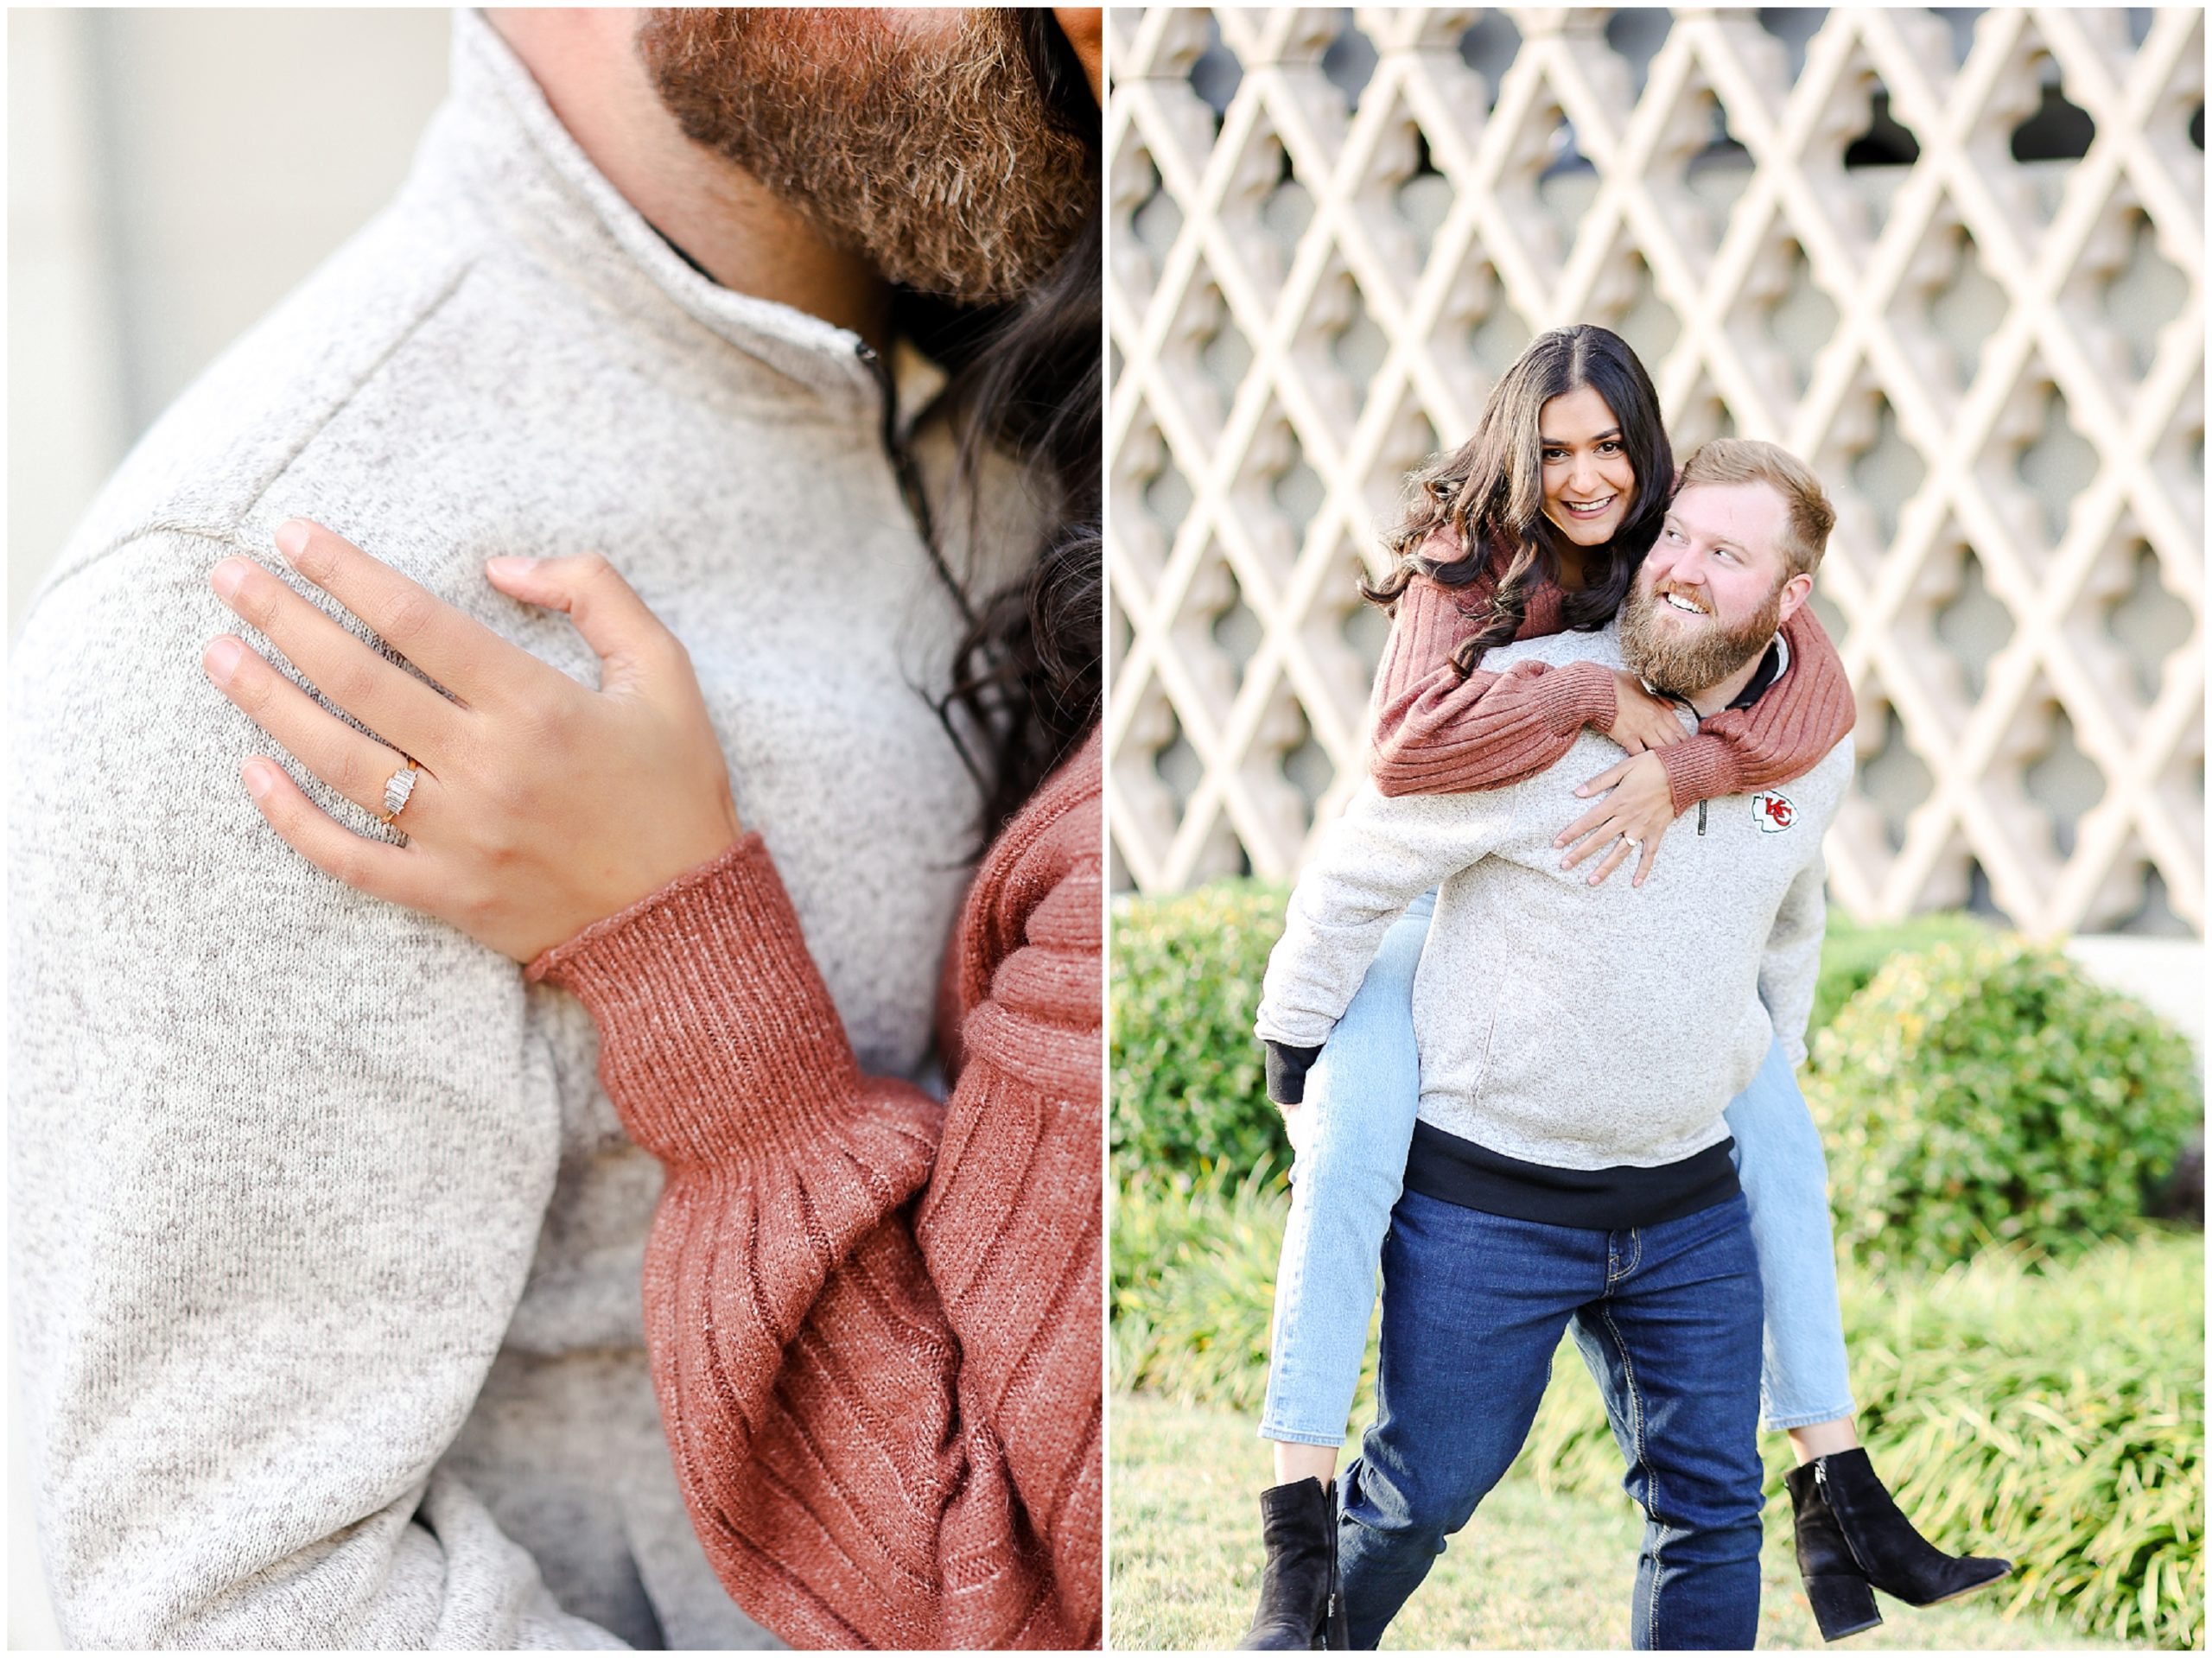 pose ideas for engagement photos 